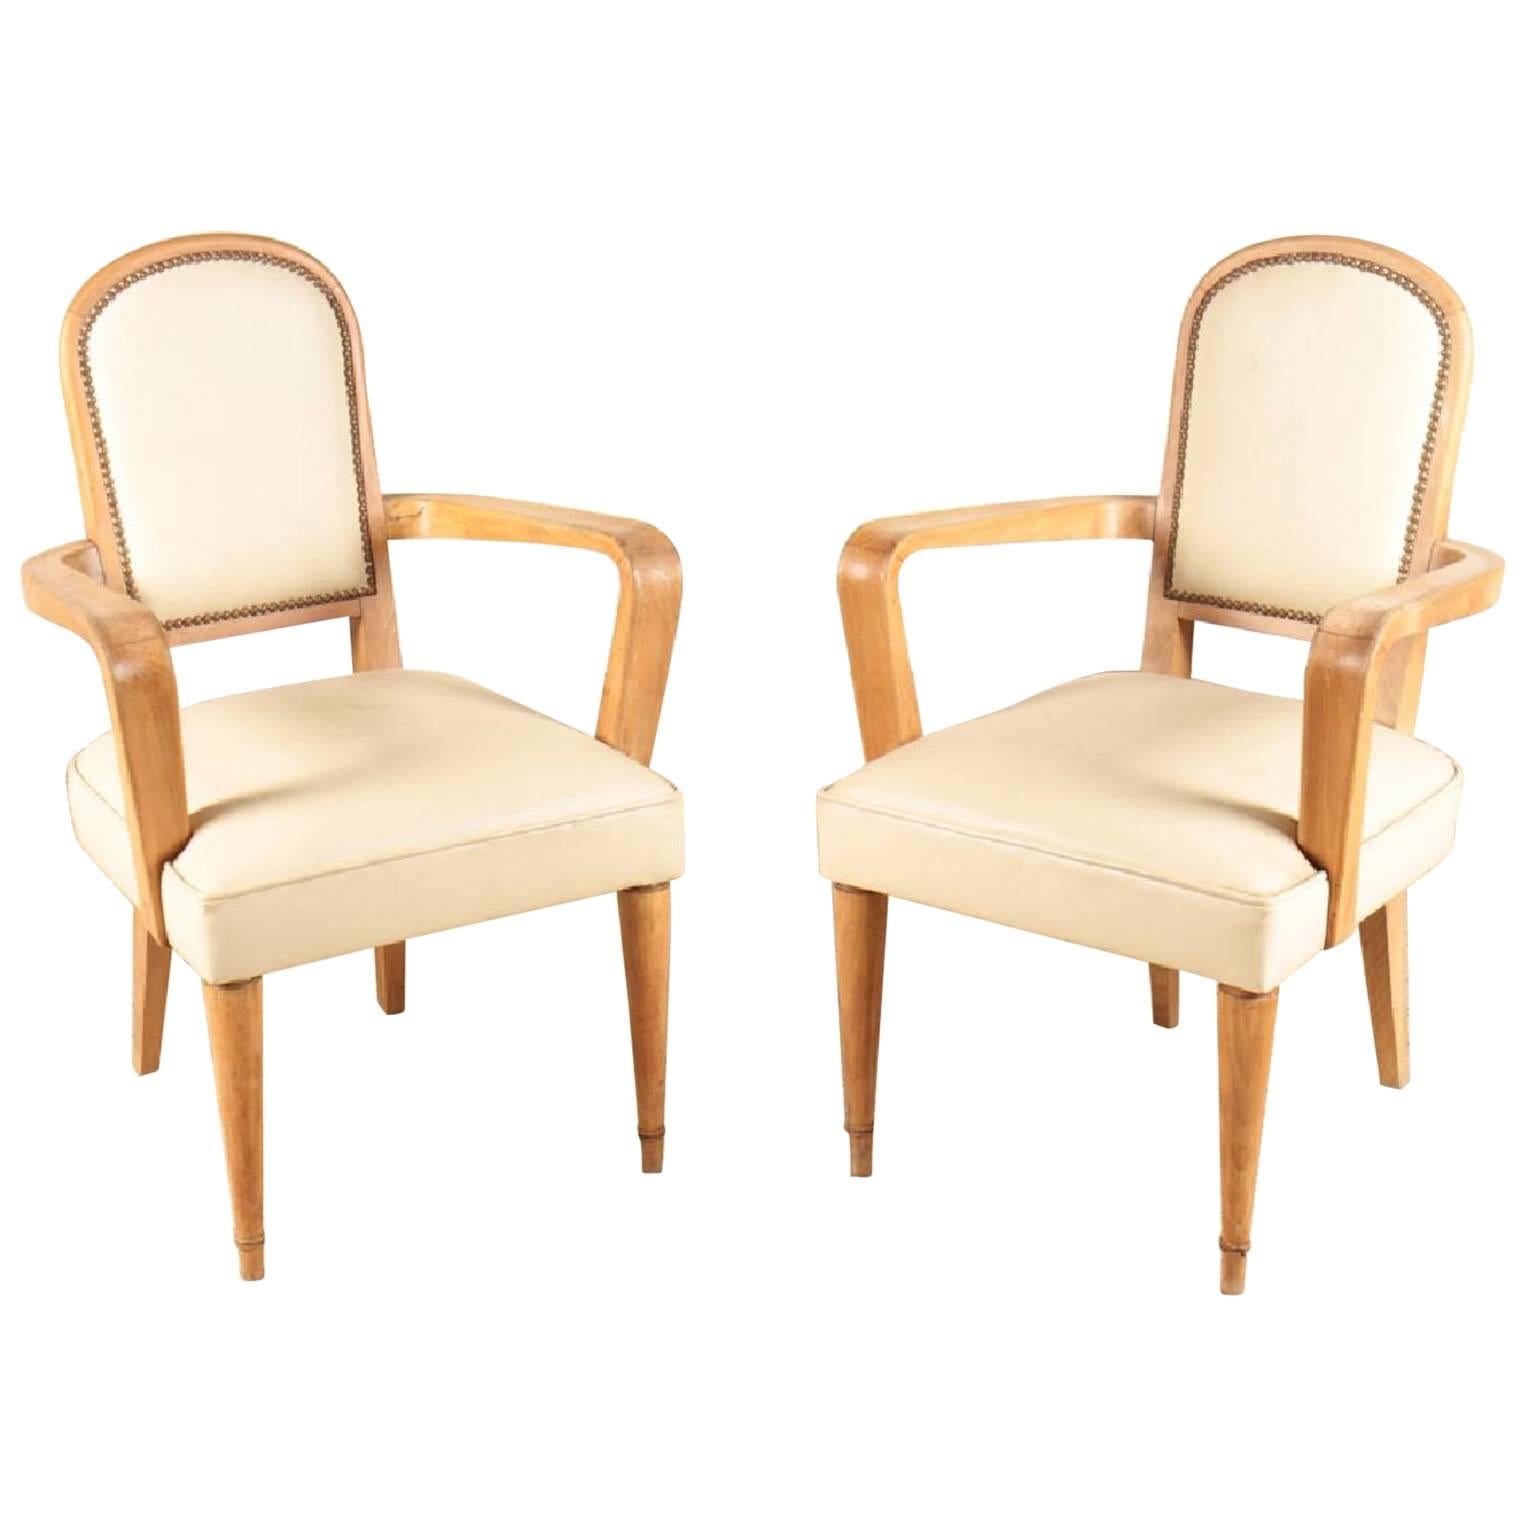 Pair of  Armchairs circa 1940 attributed to Batistin Spade